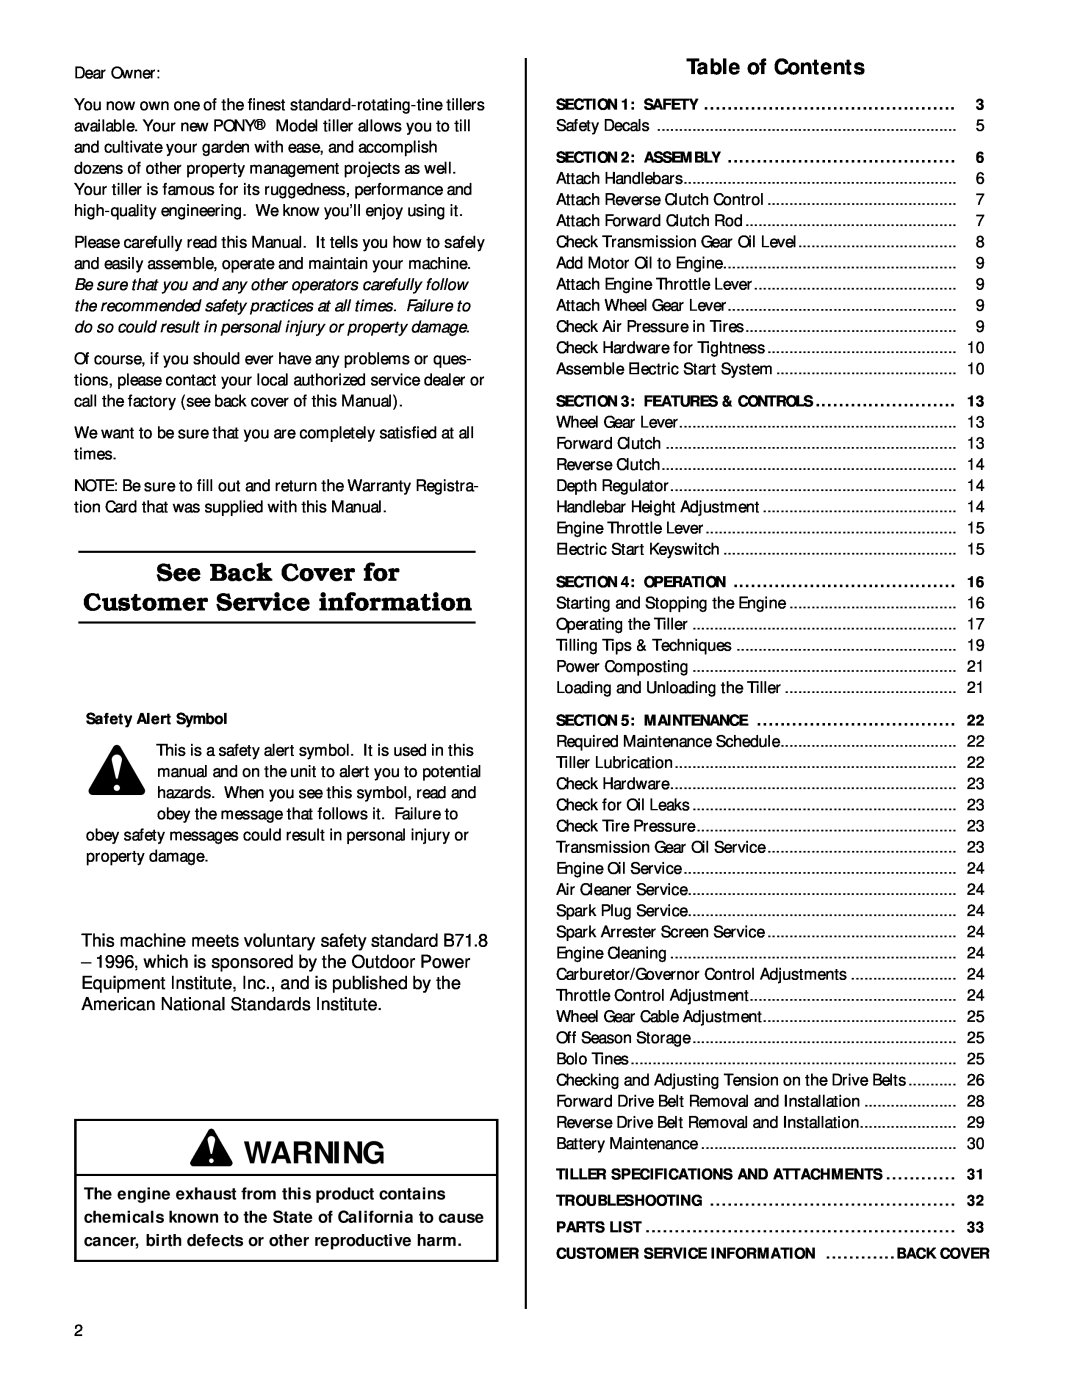 Troy-Bilt 12212, 12211 owner manual Safety Alert Symbol, Assembly, Troubleshooting, Parts List, Table of Contents 